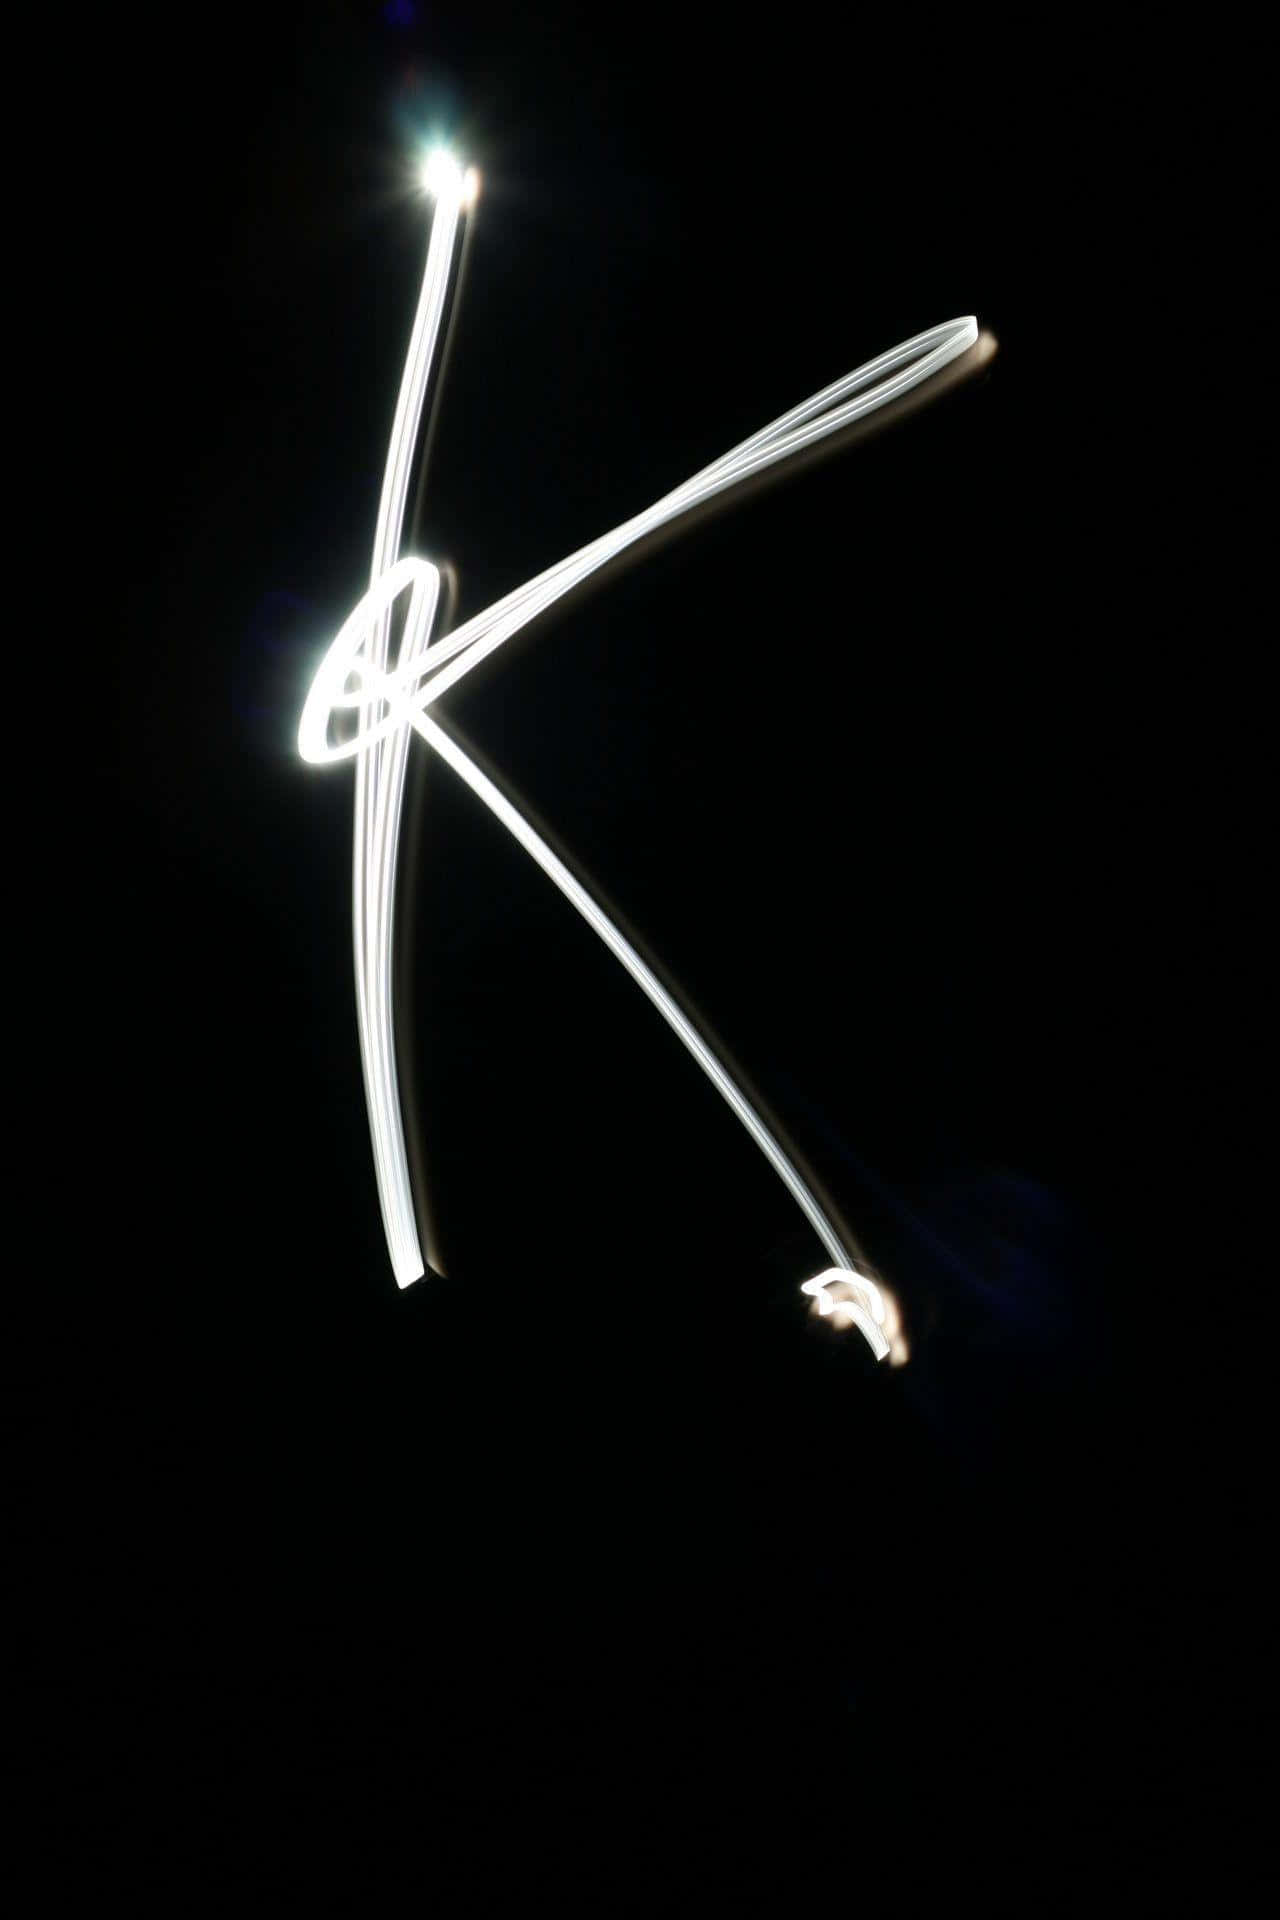 A Light Painting Of The Letter K